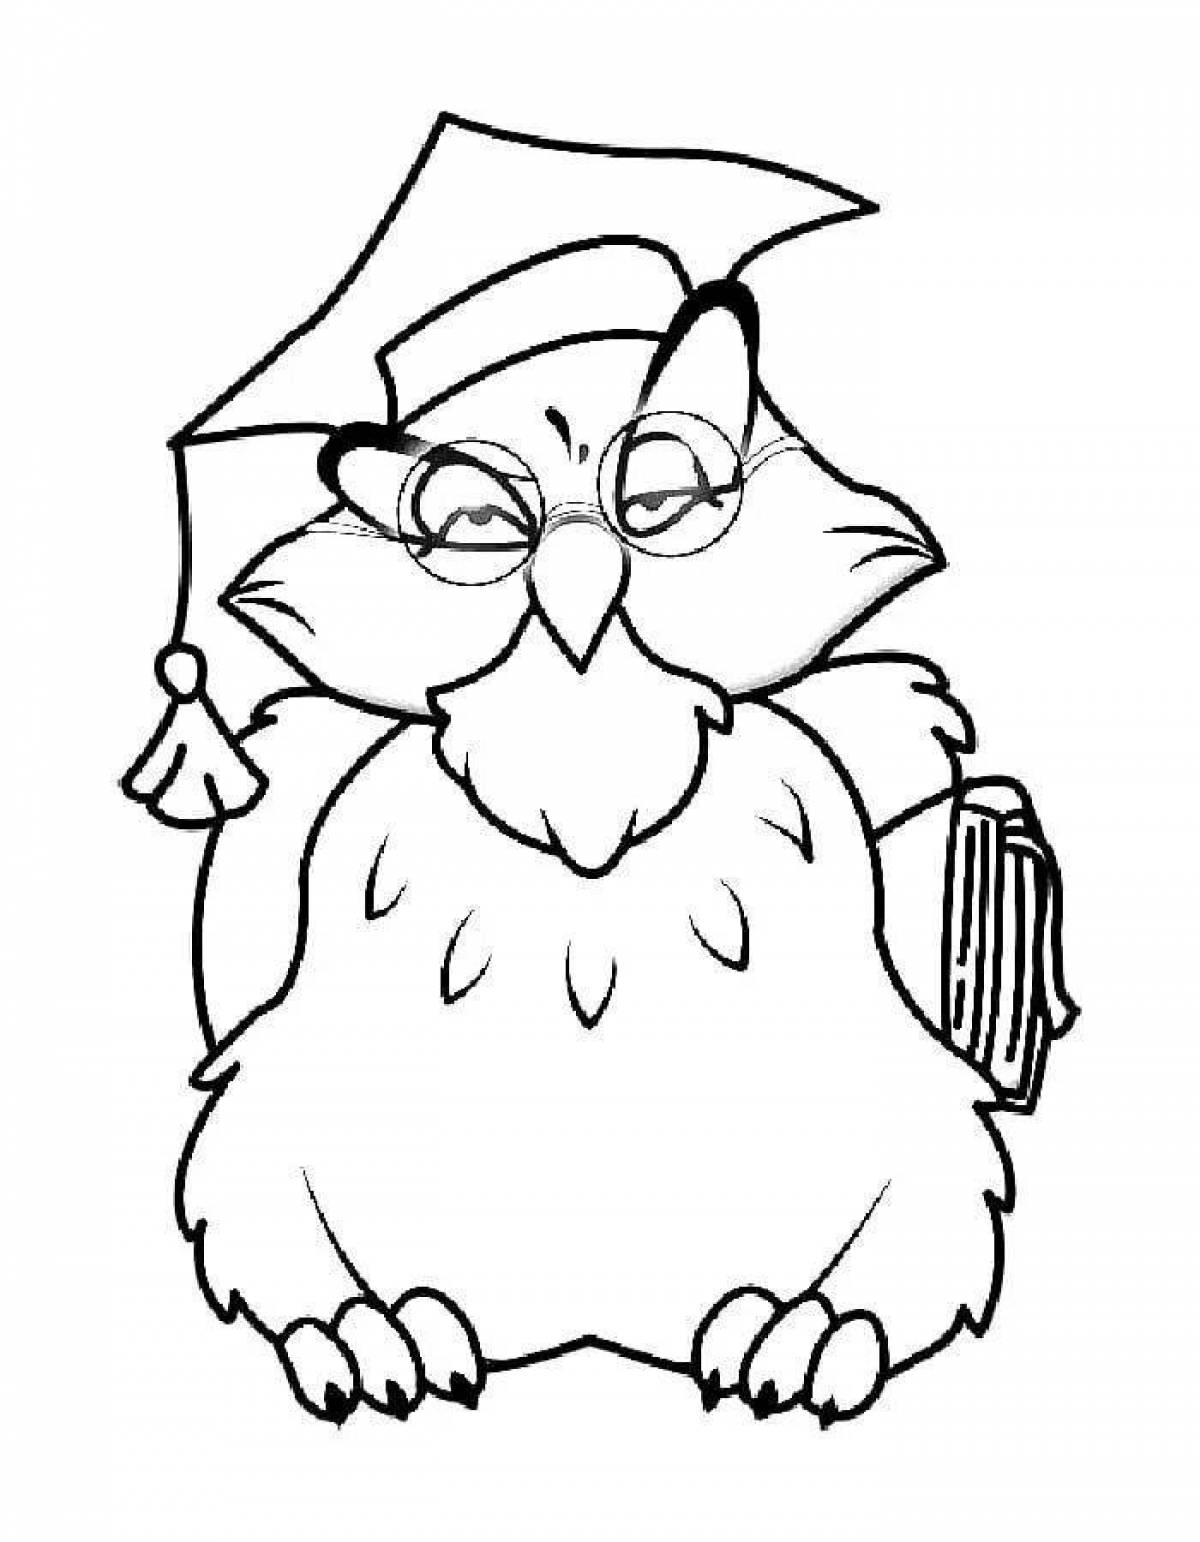 Awesome scientific owl coloring page